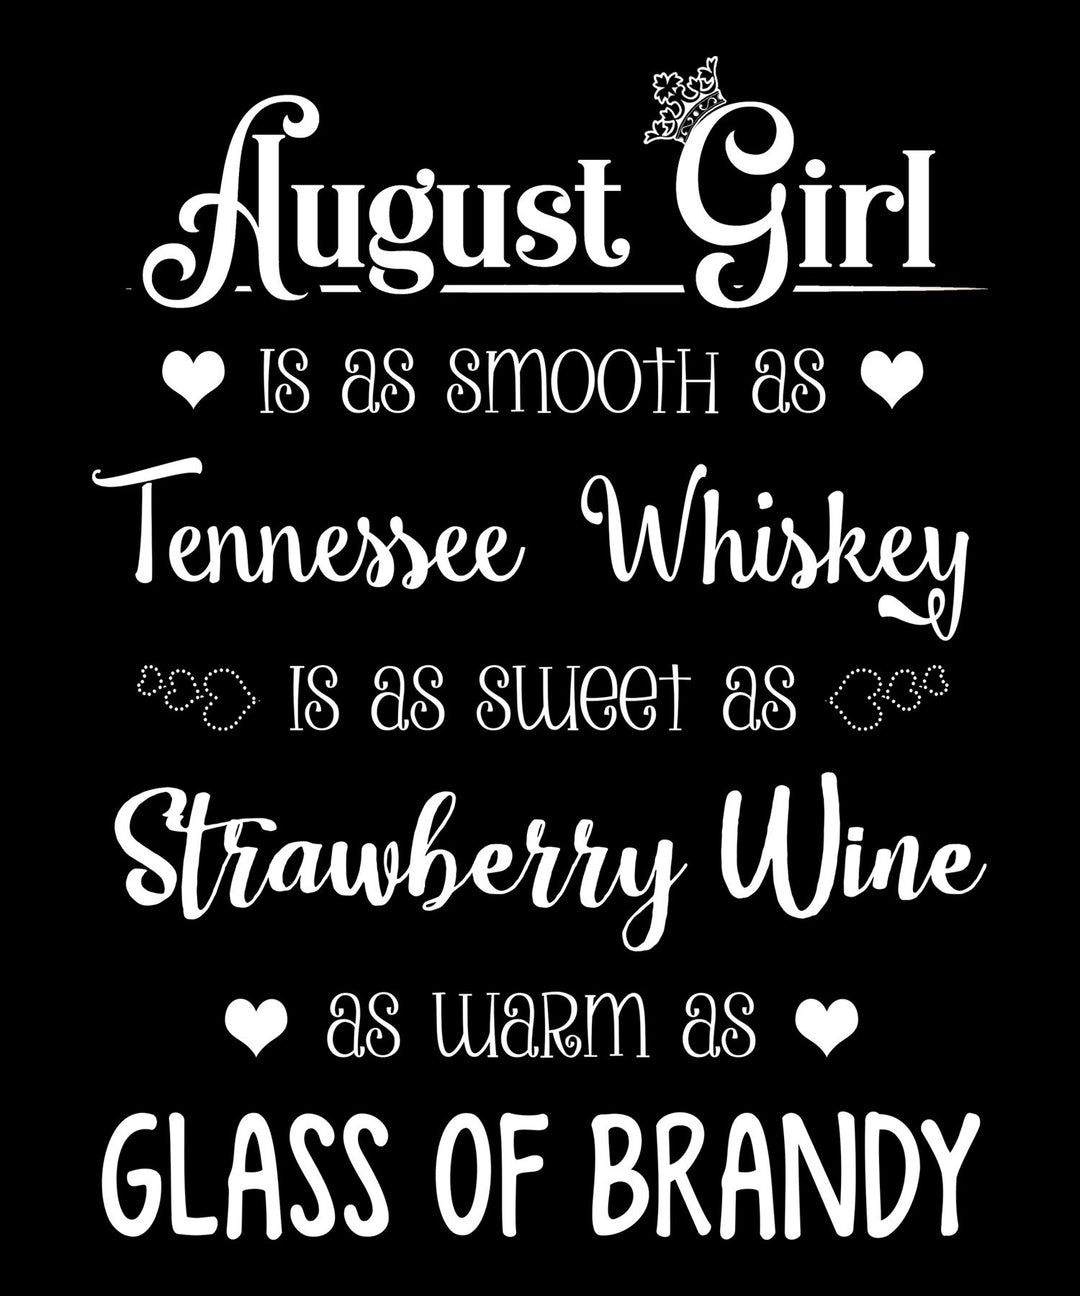 August Girl Is As Smooth As Whiskey.........As Warm As Brandy"